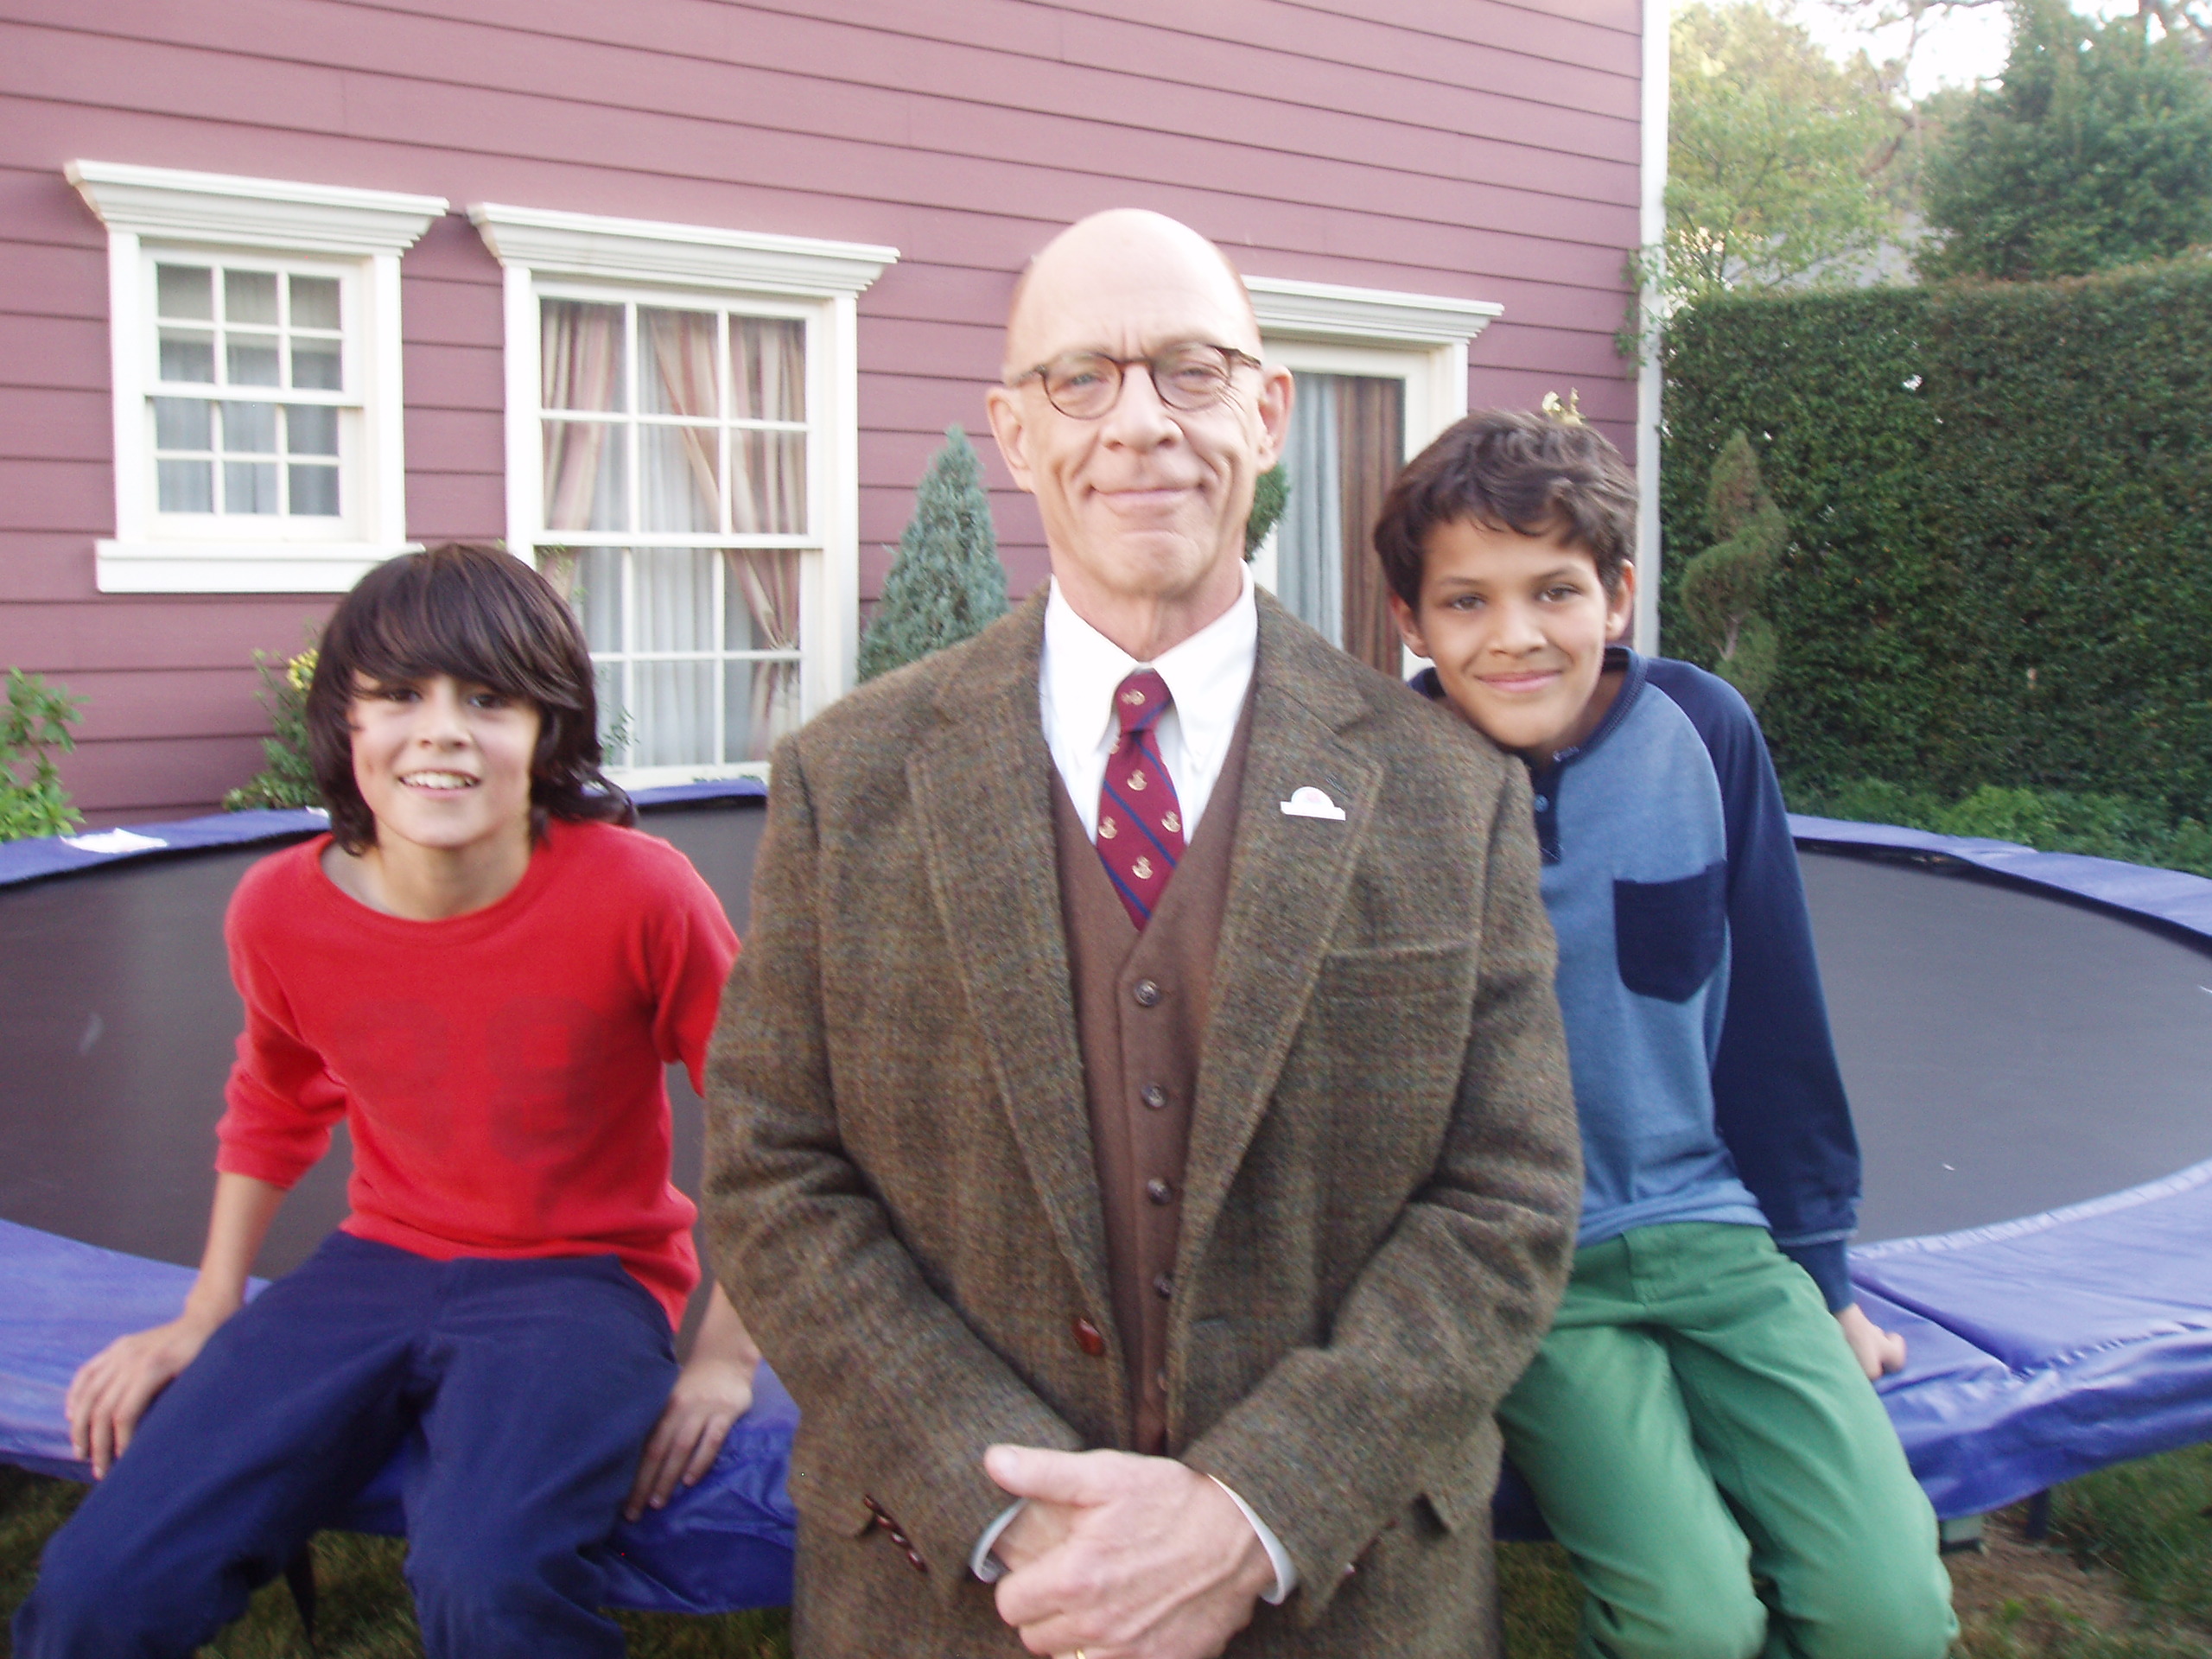 Hangin with JK Simmons and Alazay on the set of a Farmers Commercial